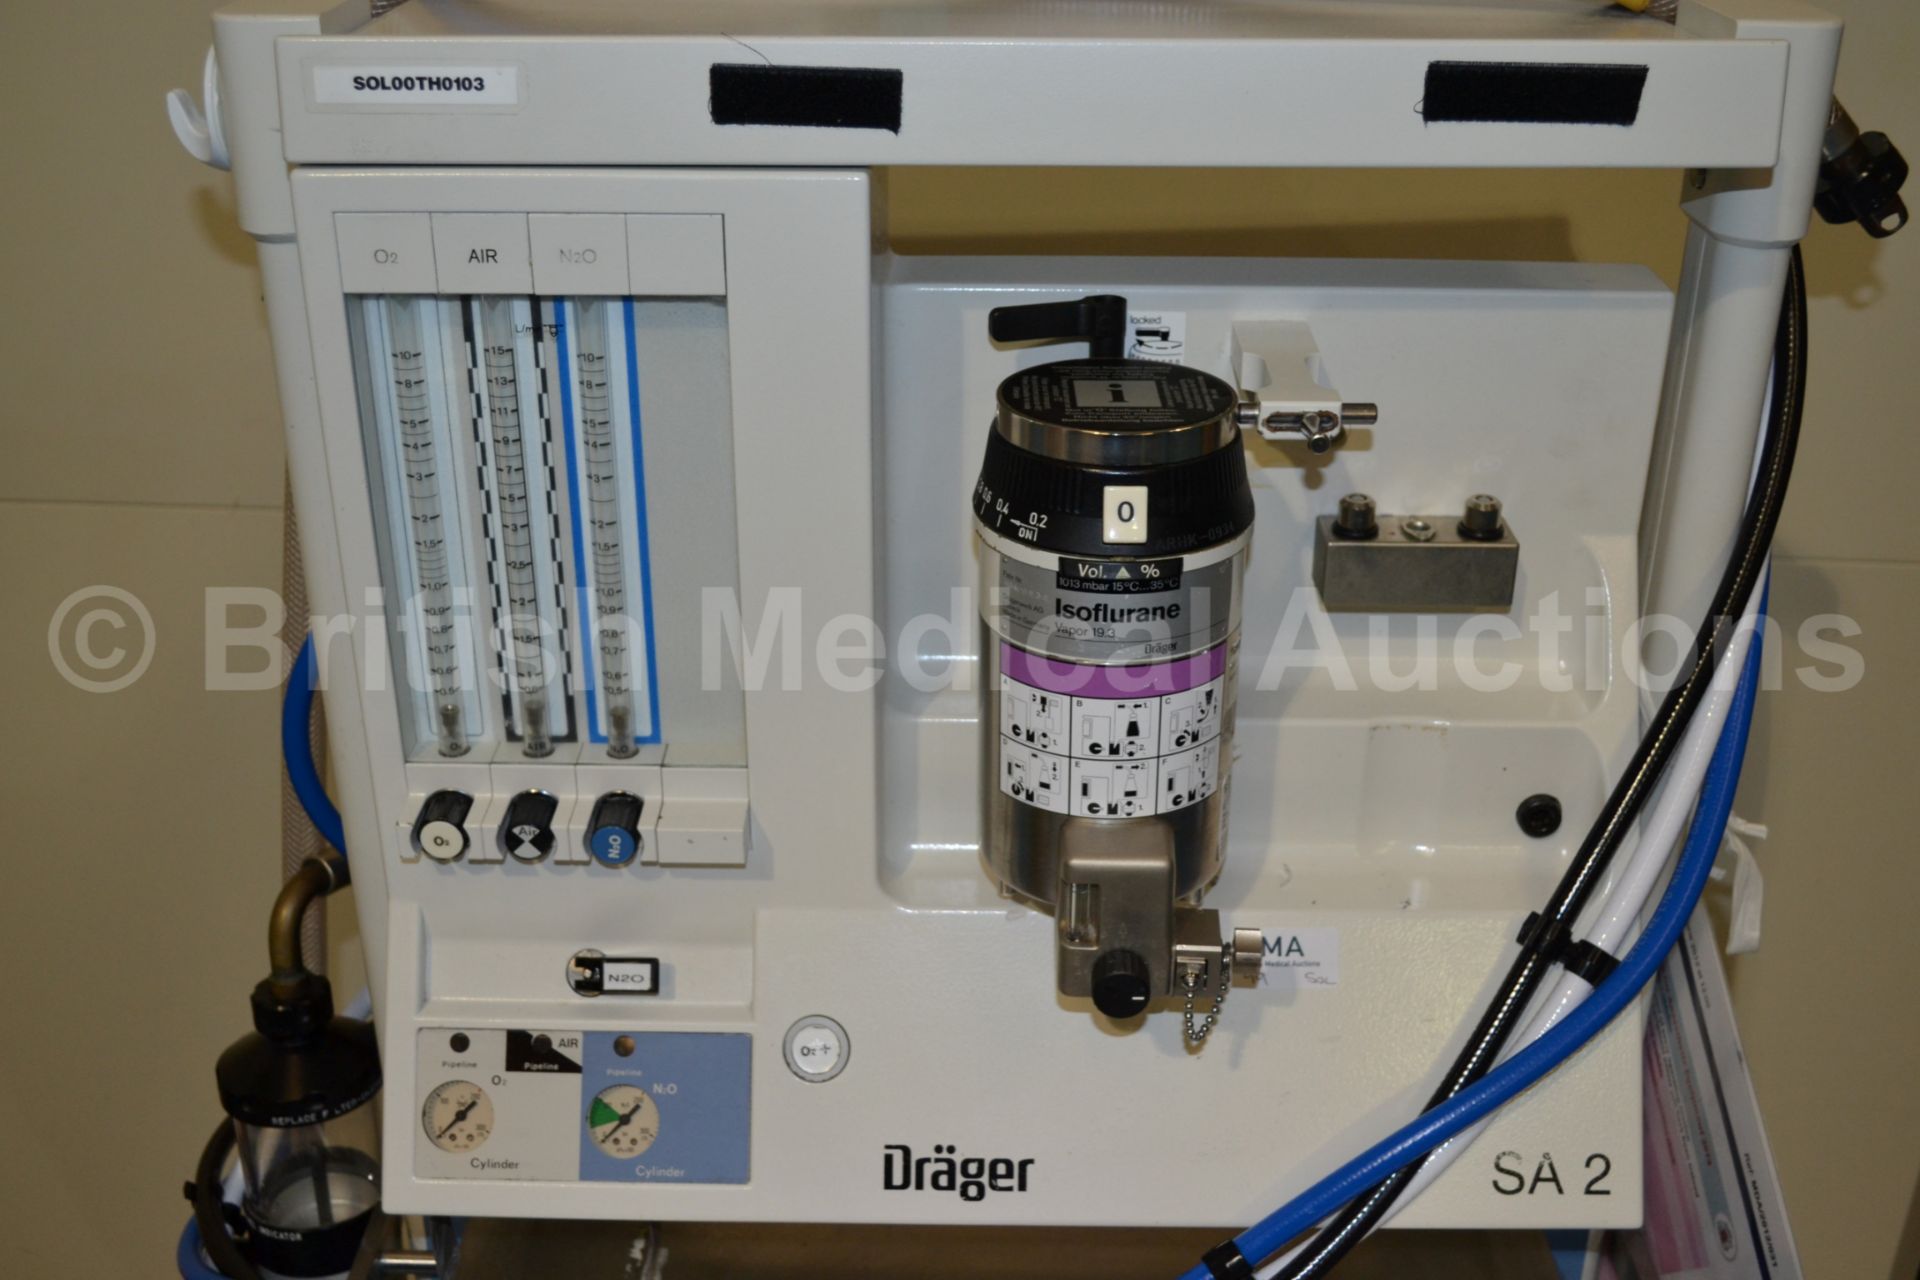 Drager SA 2 Anaesthesia System with Drager Vapor 1 - Image 4 of 4